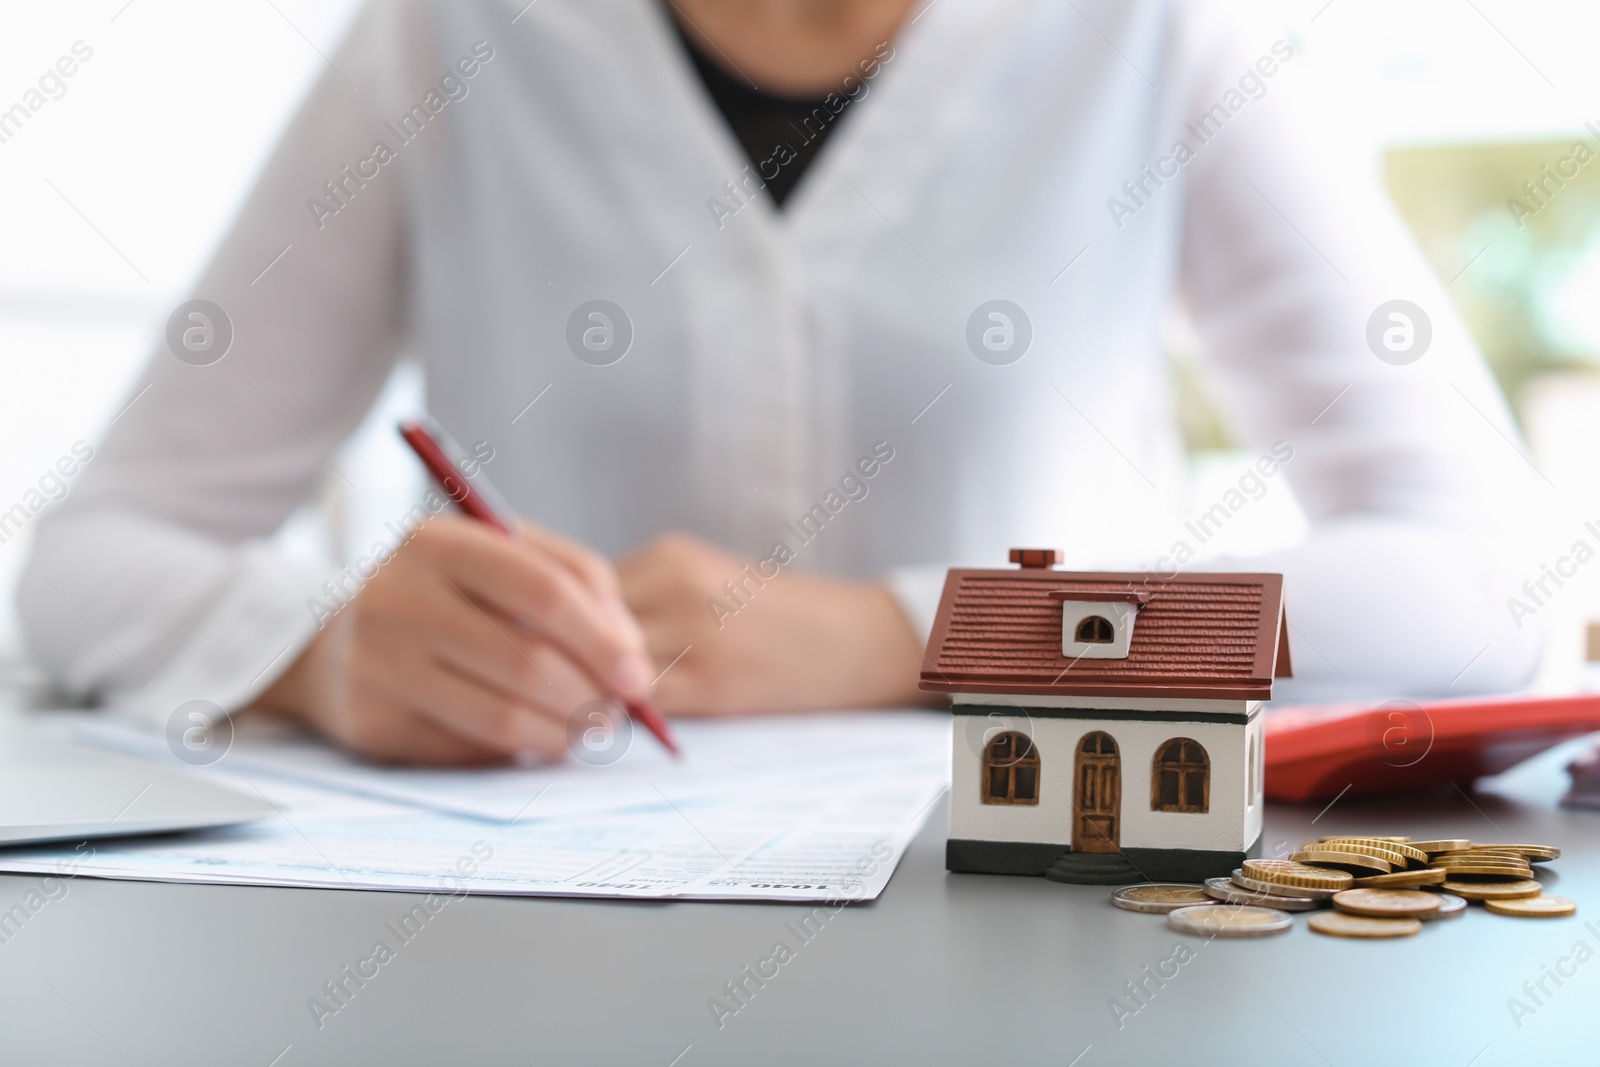 Photo of House model, coins and blurred woman on background. Tax day